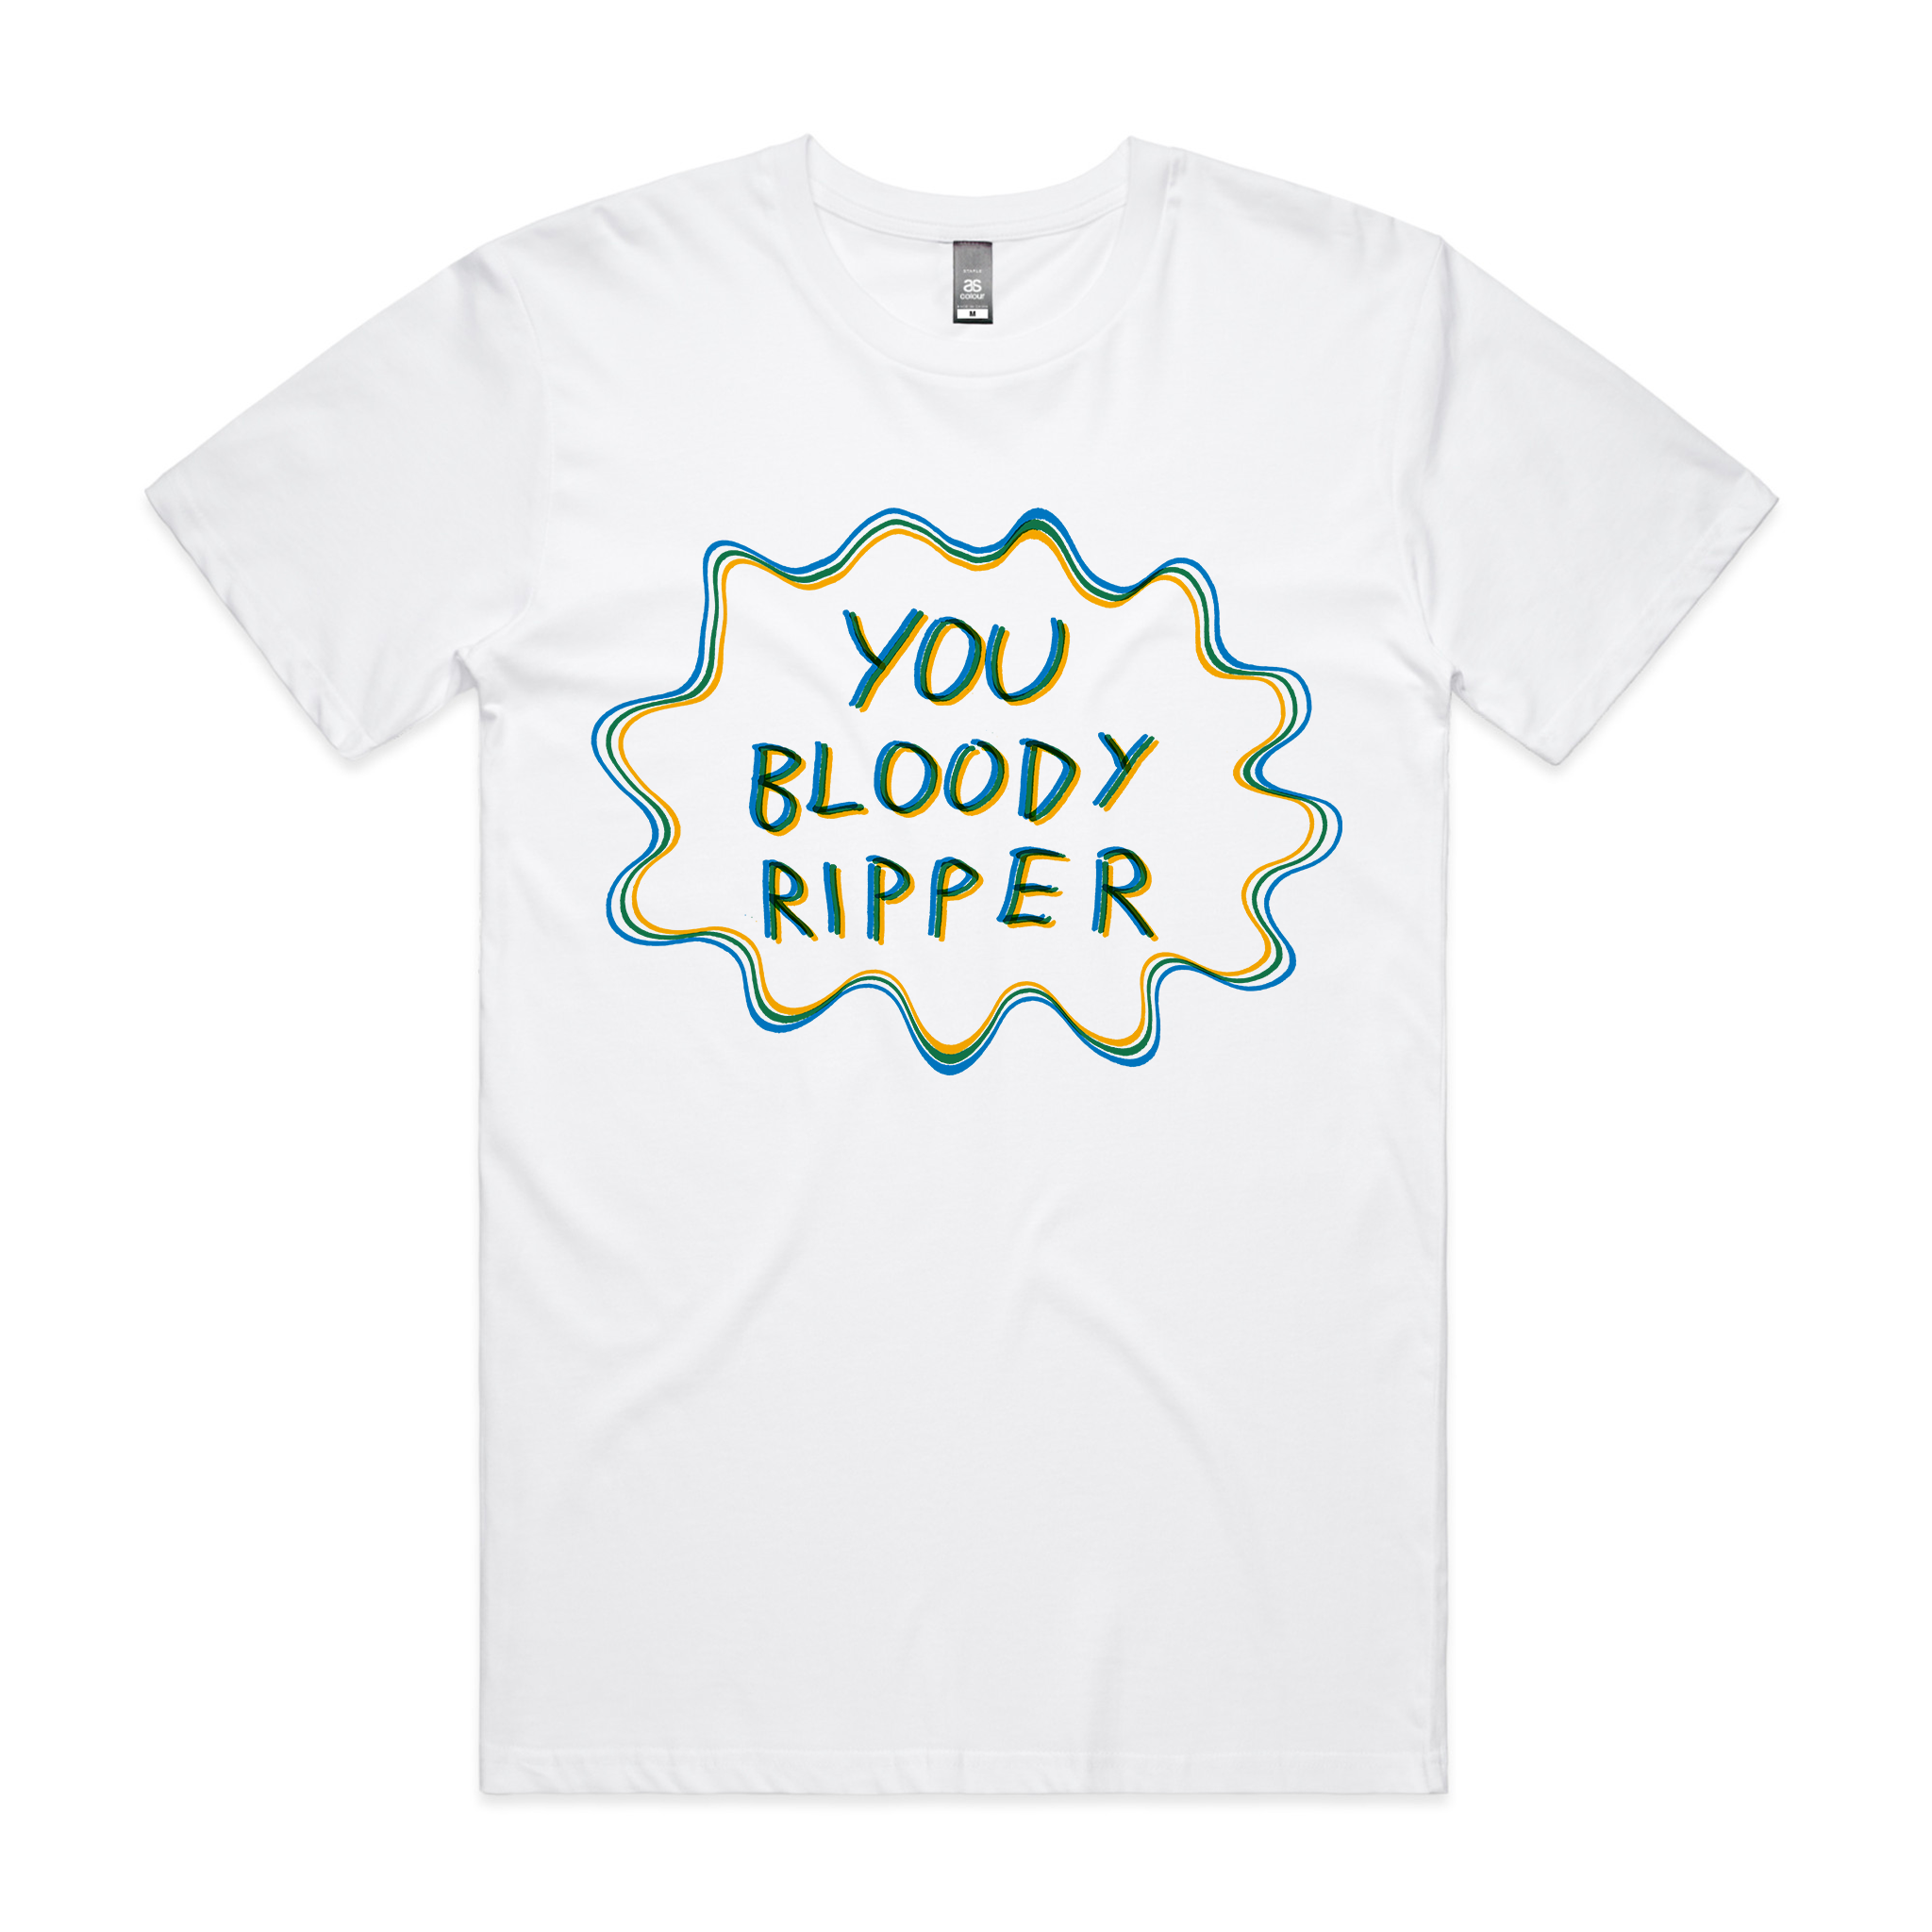 You Bloody Ripper Tee